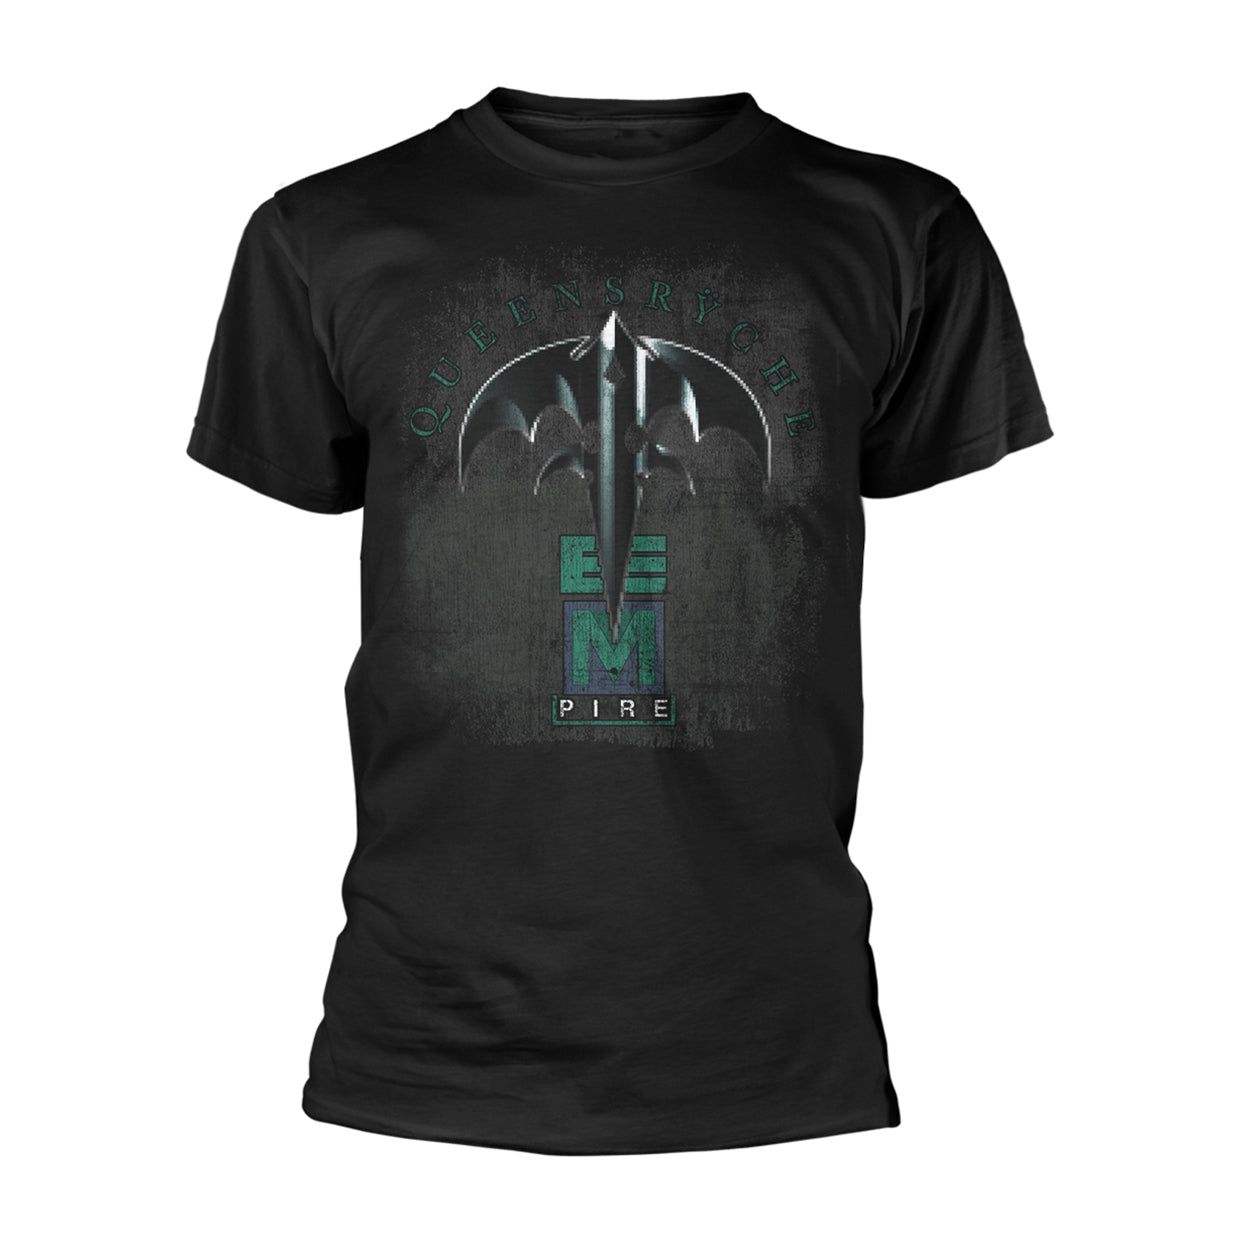 Queensryche "Empire - 30 Years" T shirt